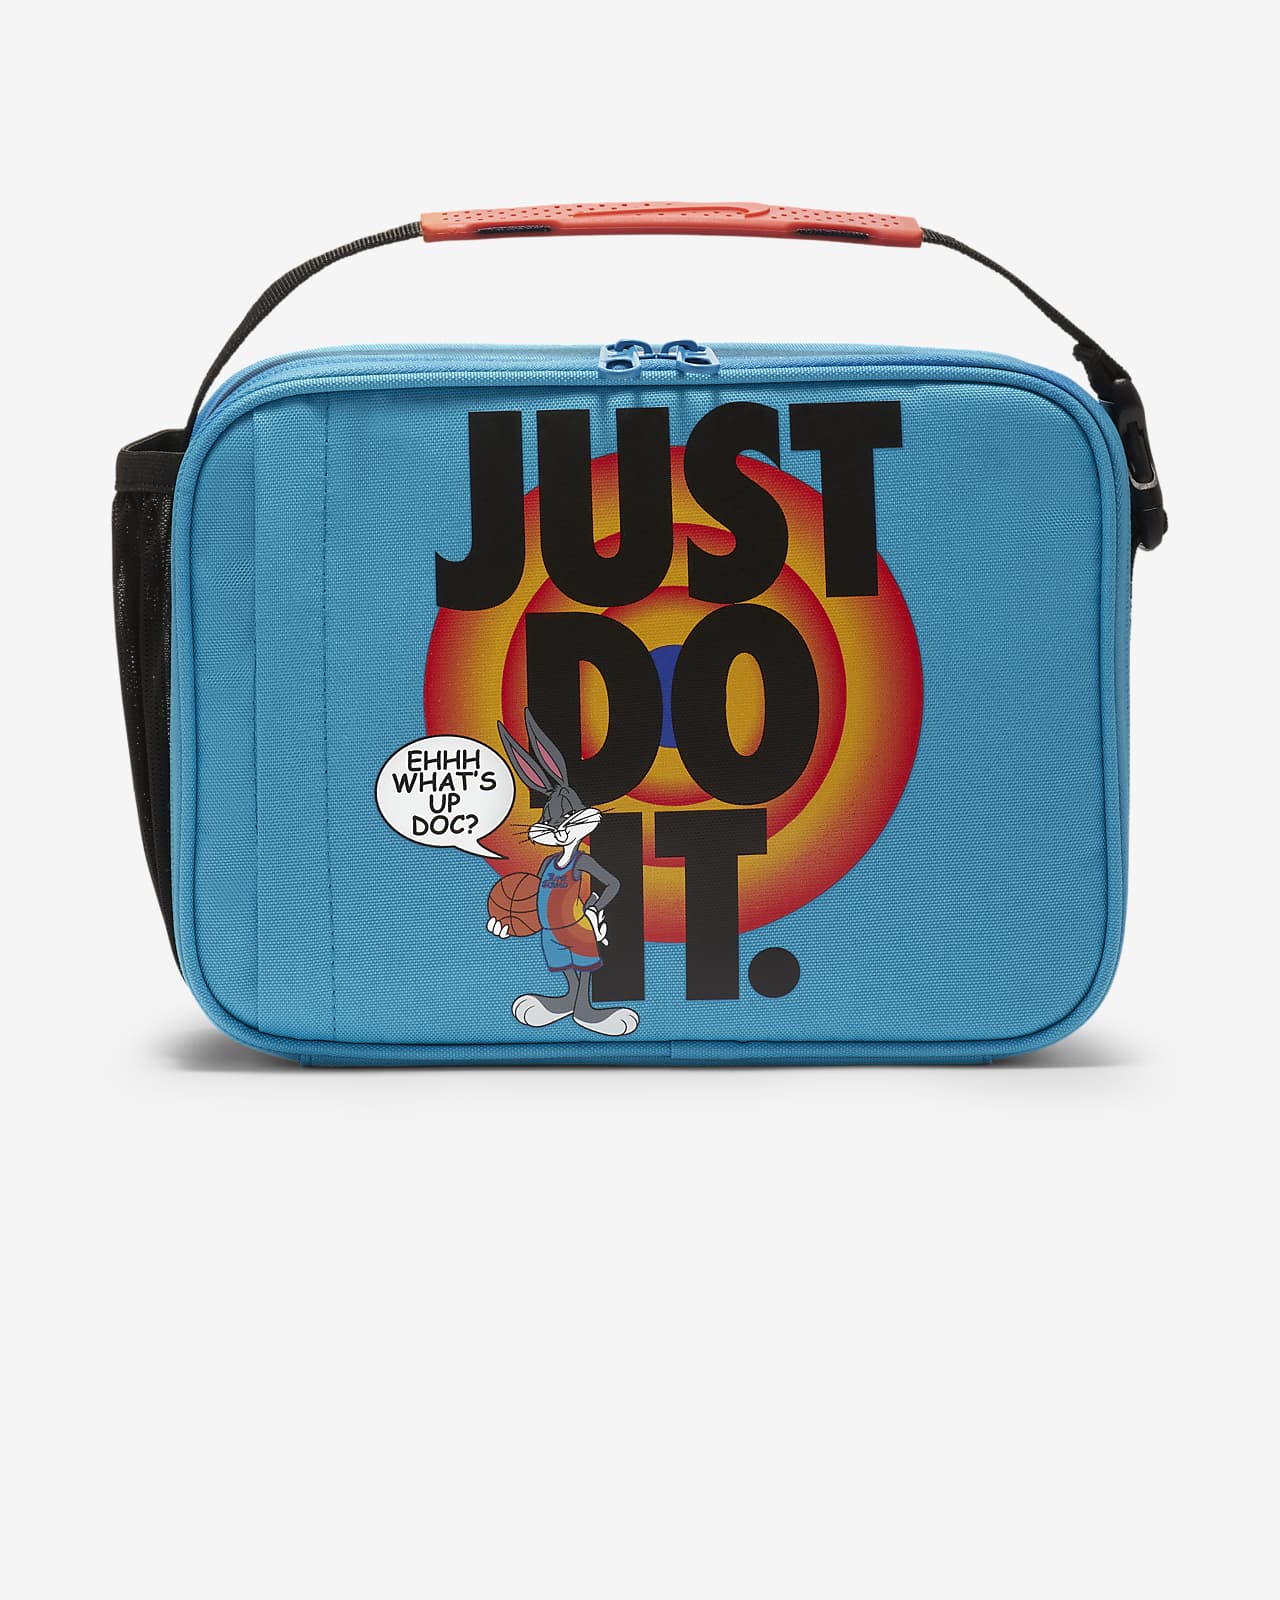 Nike Fuel Pack x Space Jam: A New Legacy Lunch Bag